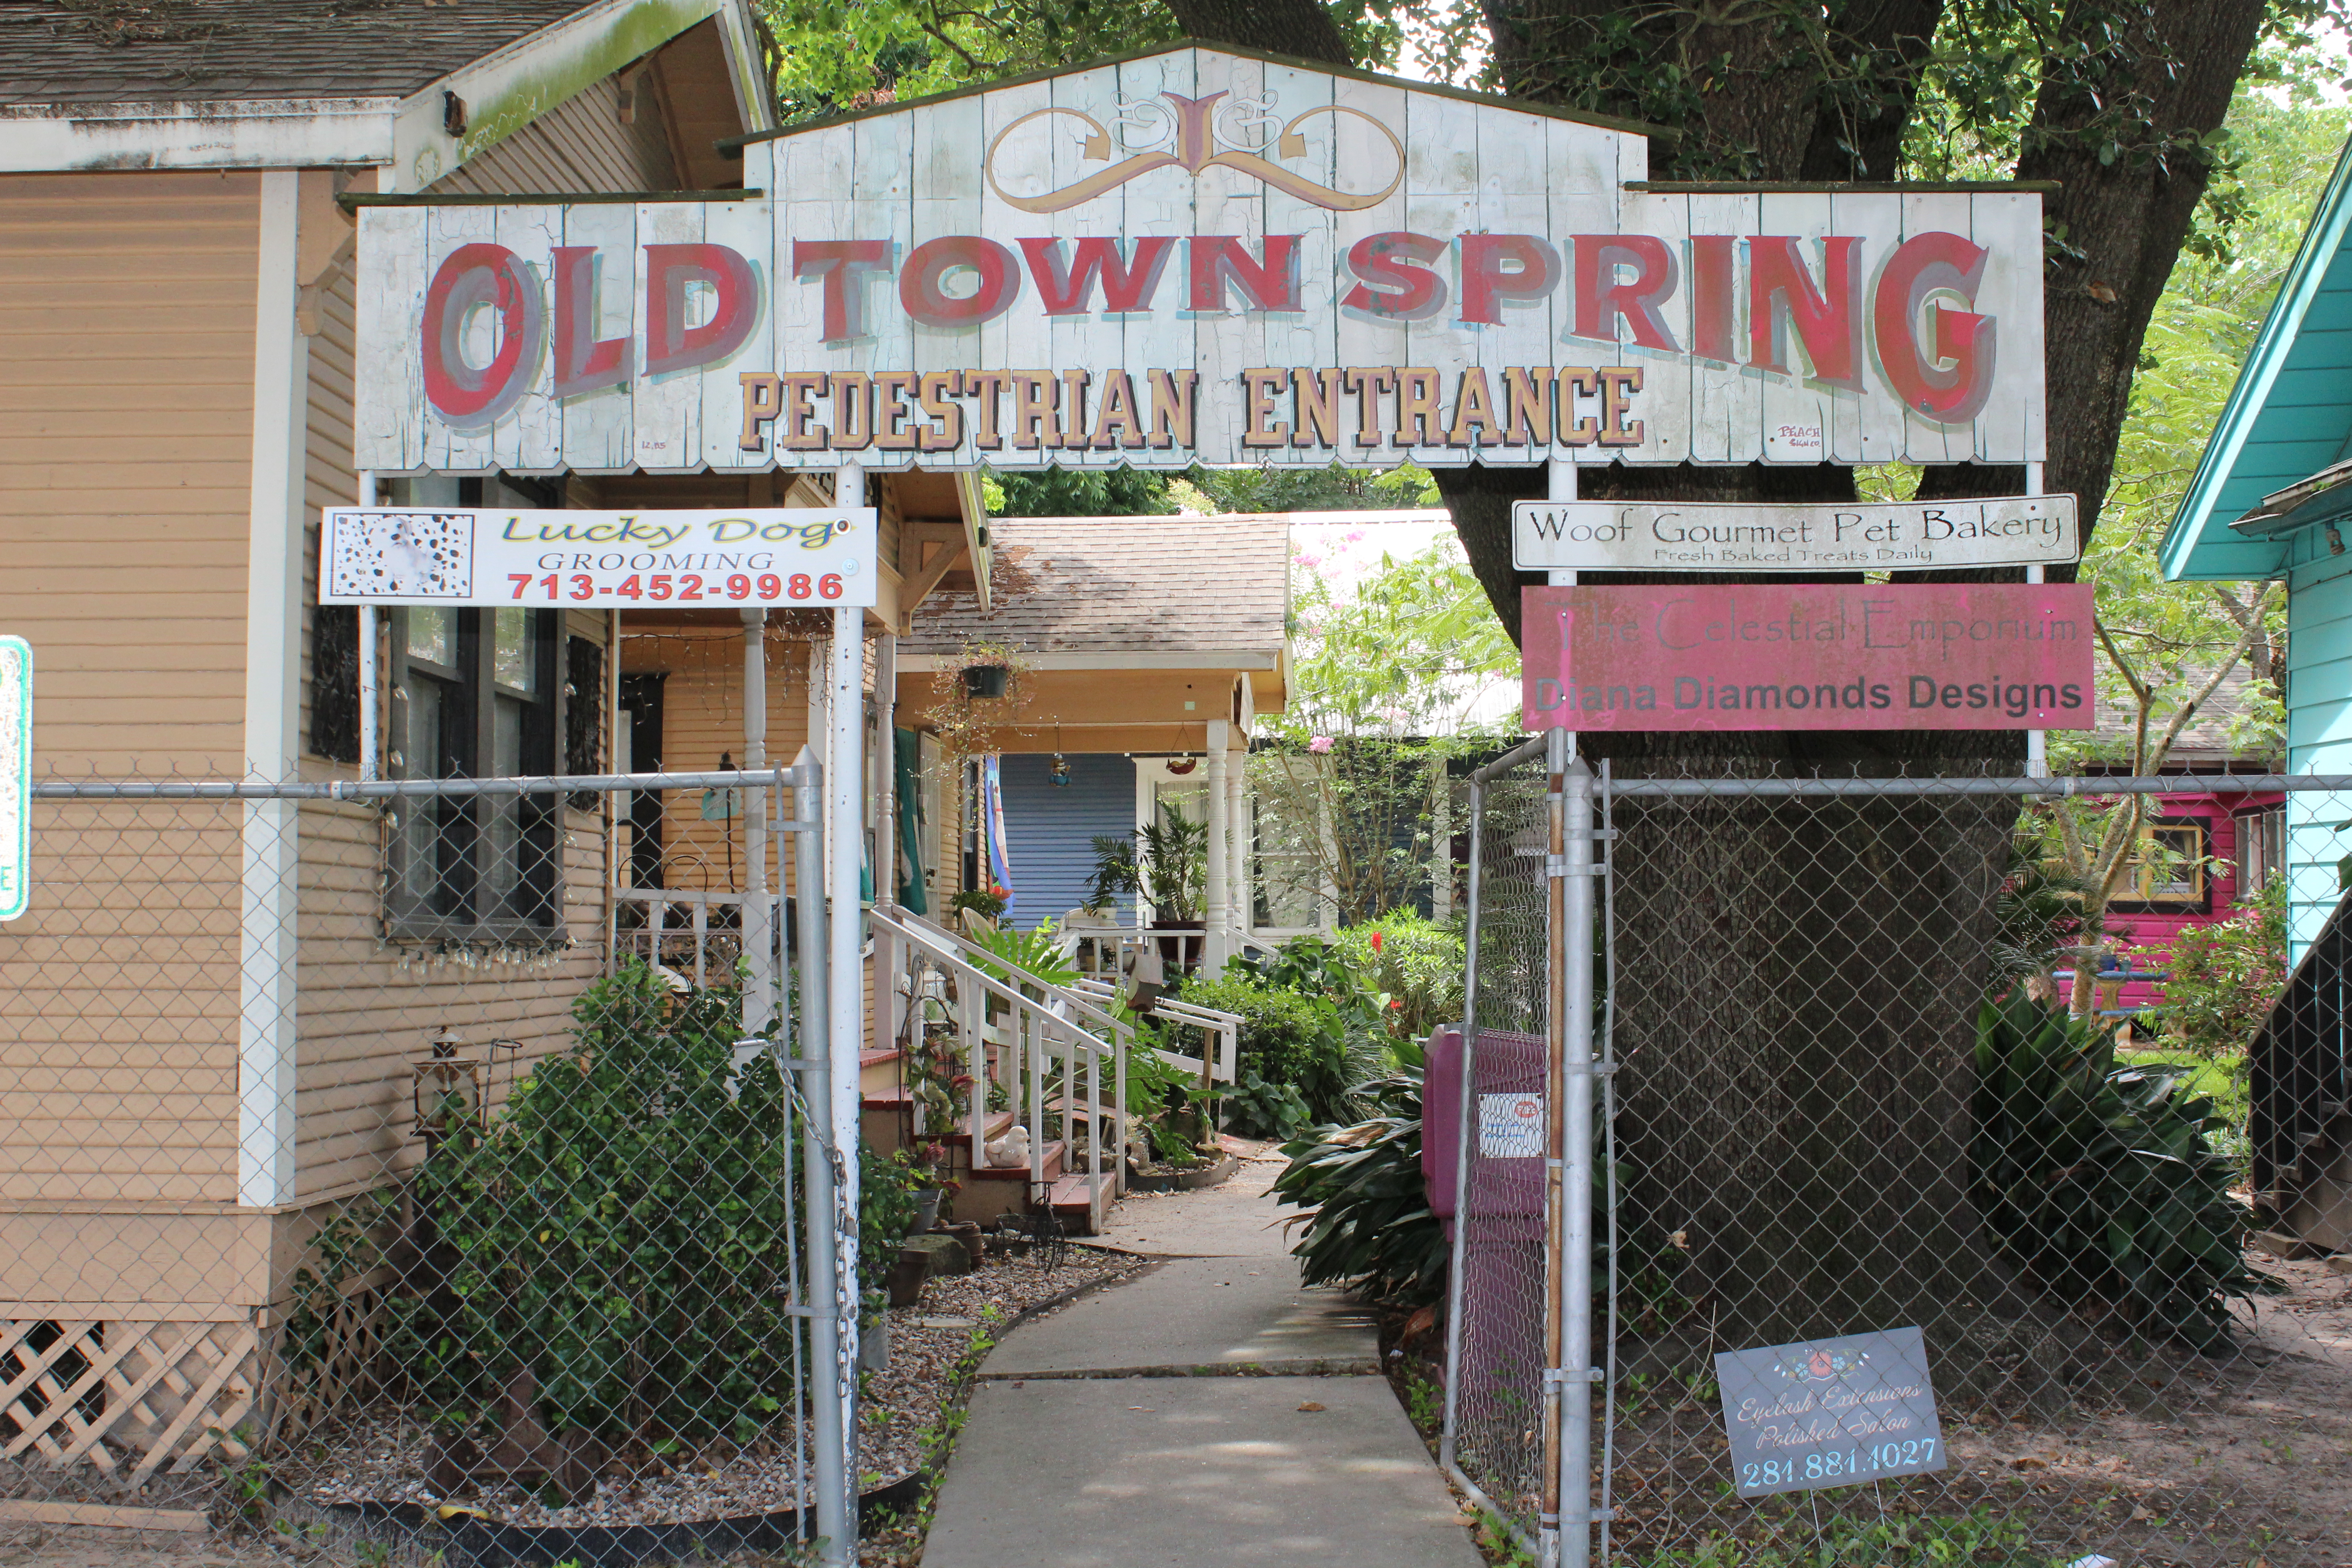 HTownHoods Old Town Spring is a community jewel